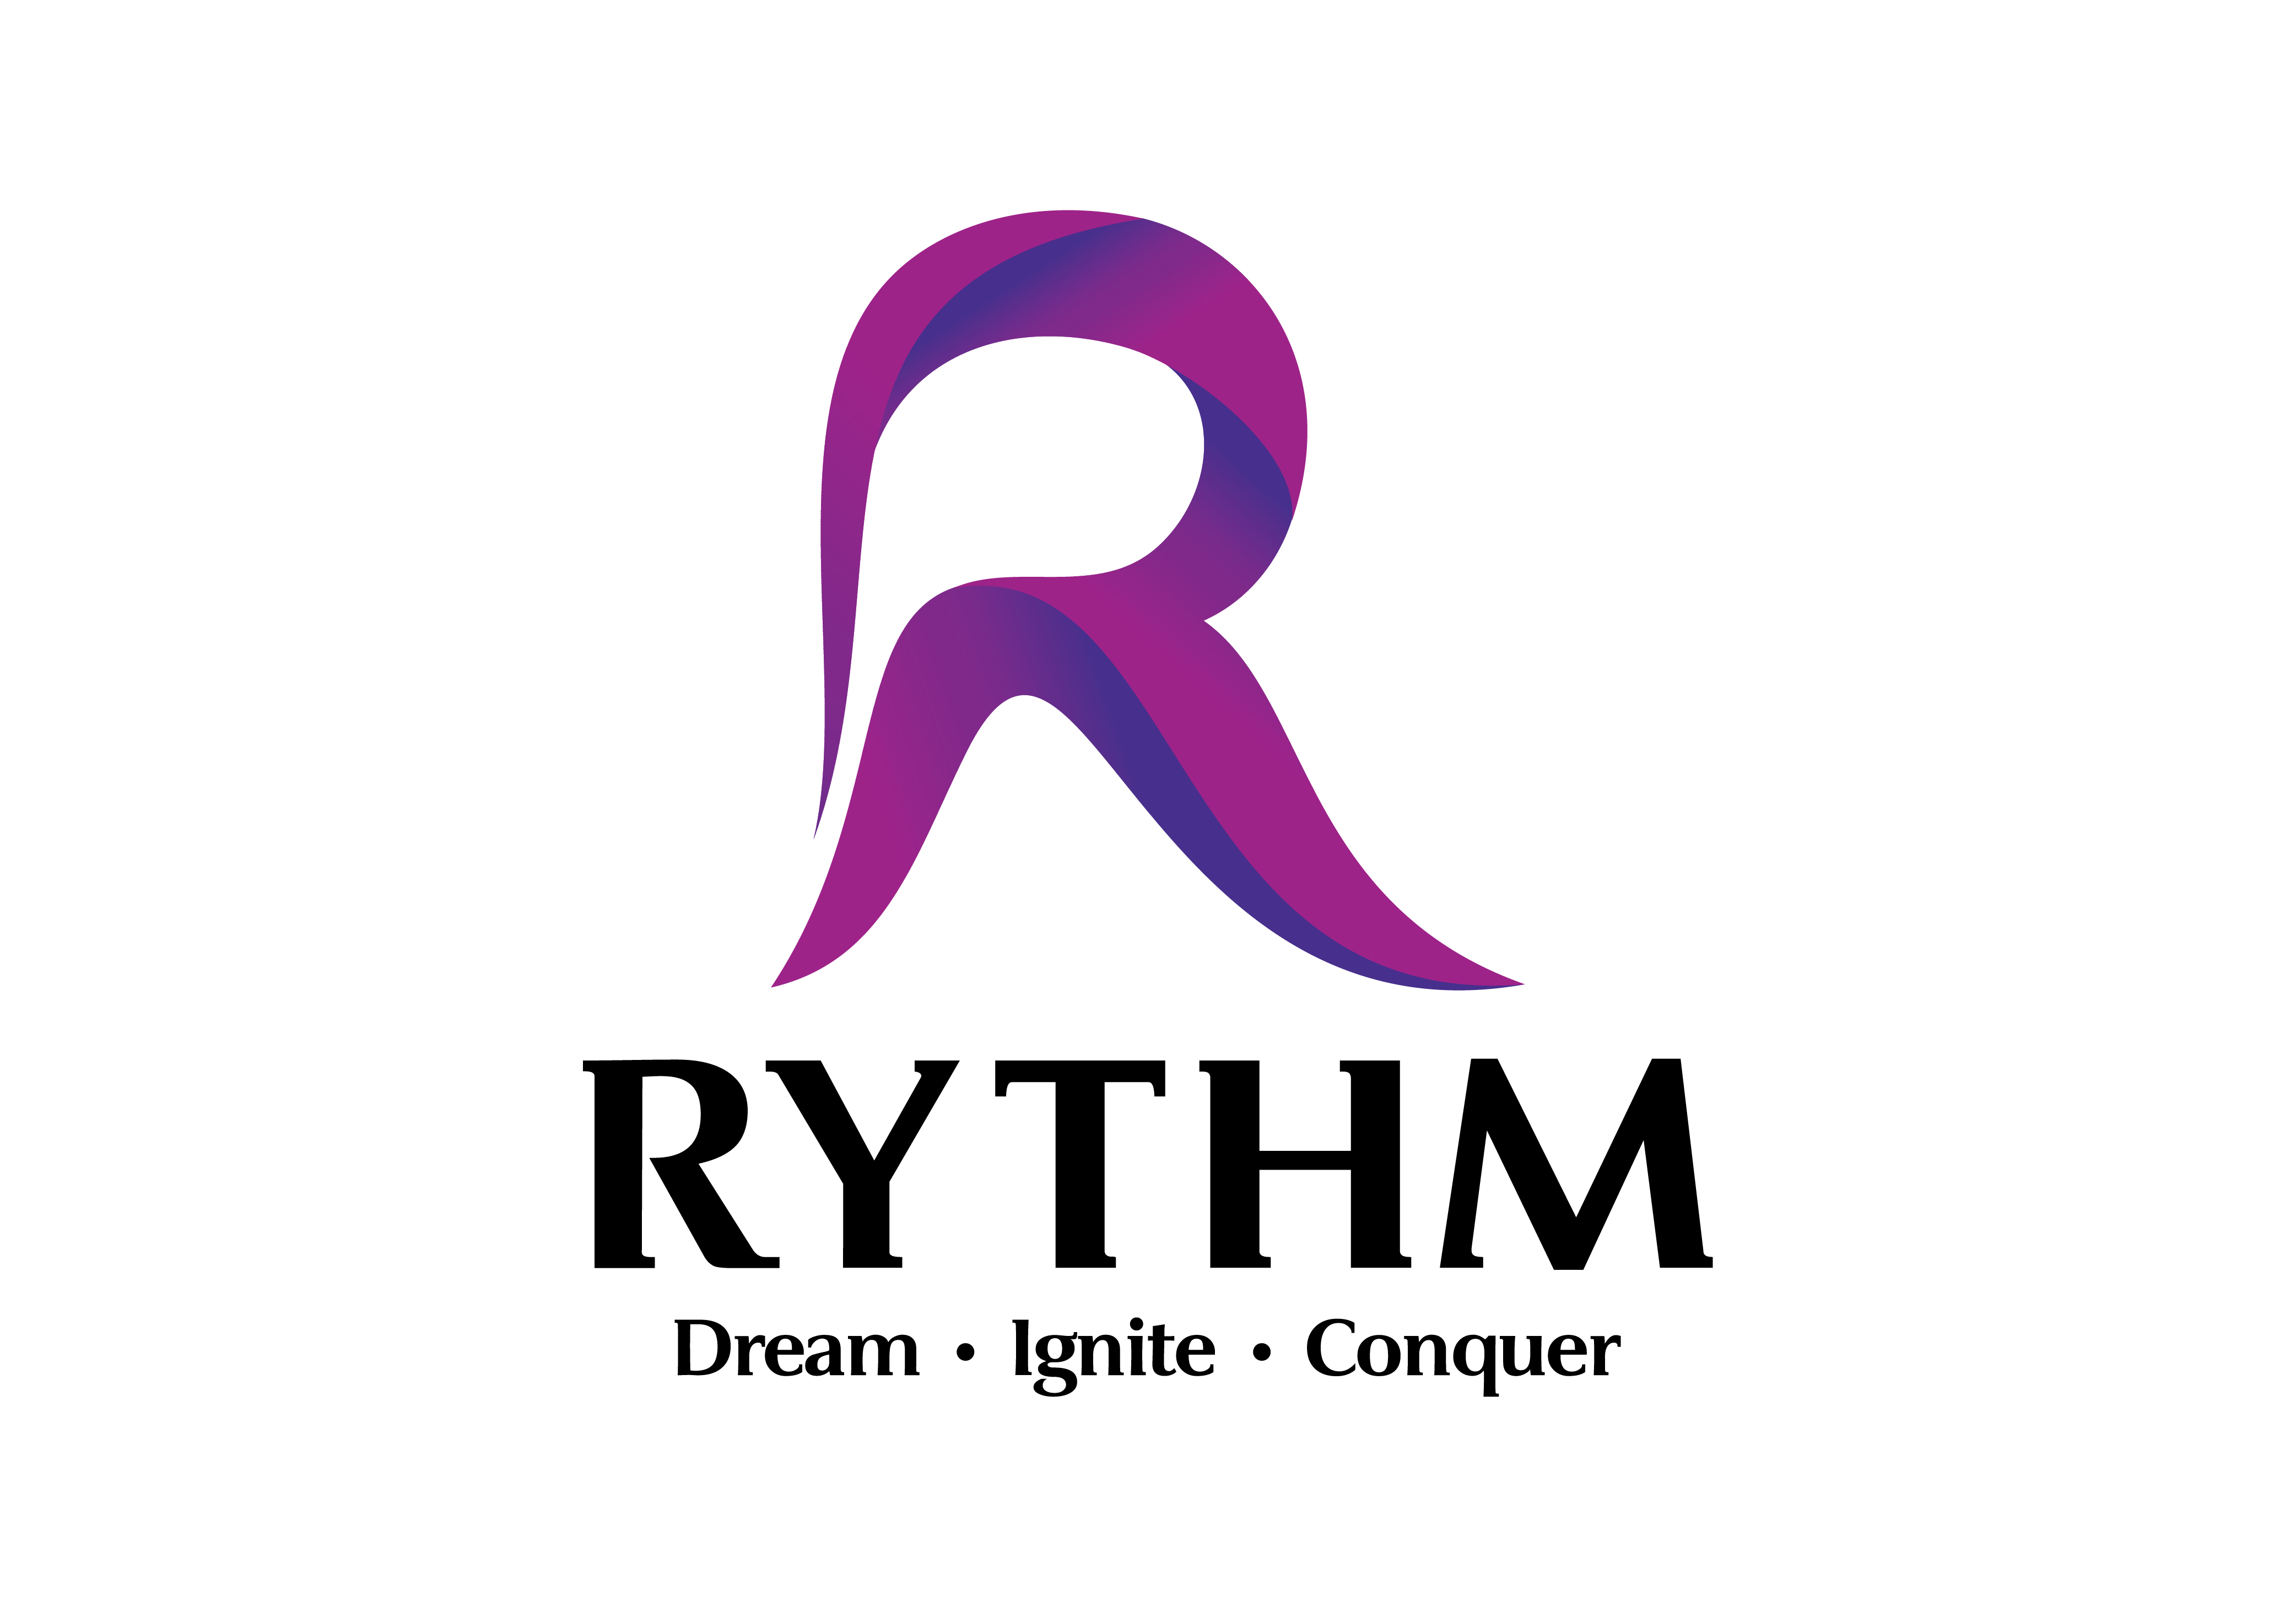 https://www.pakpositions.com/company/rythm-traders